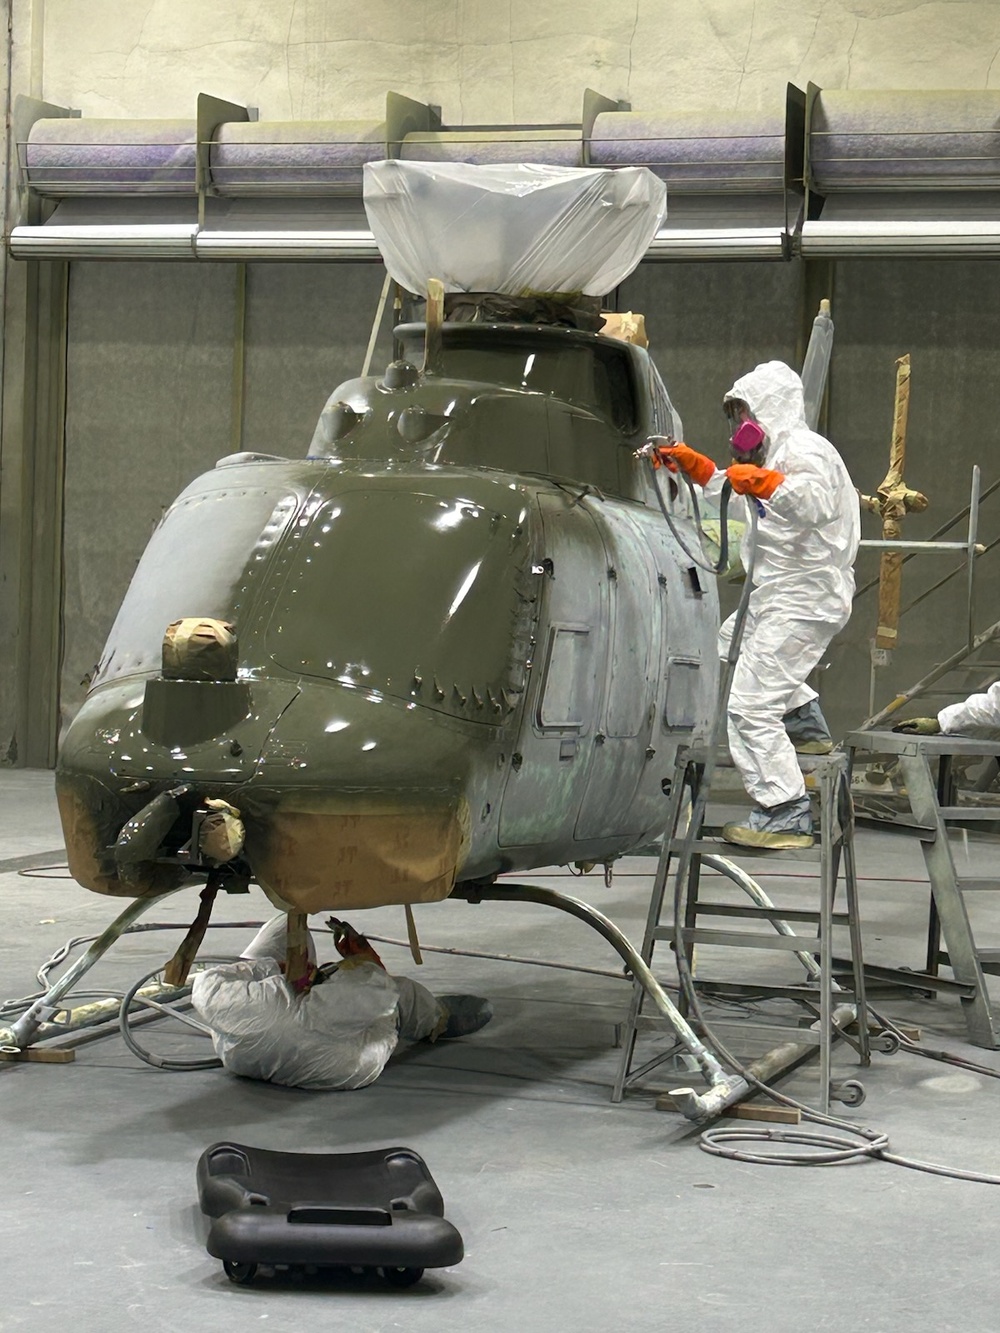 FRCSW First Full Paint Scheme on Unmanned Helicopter